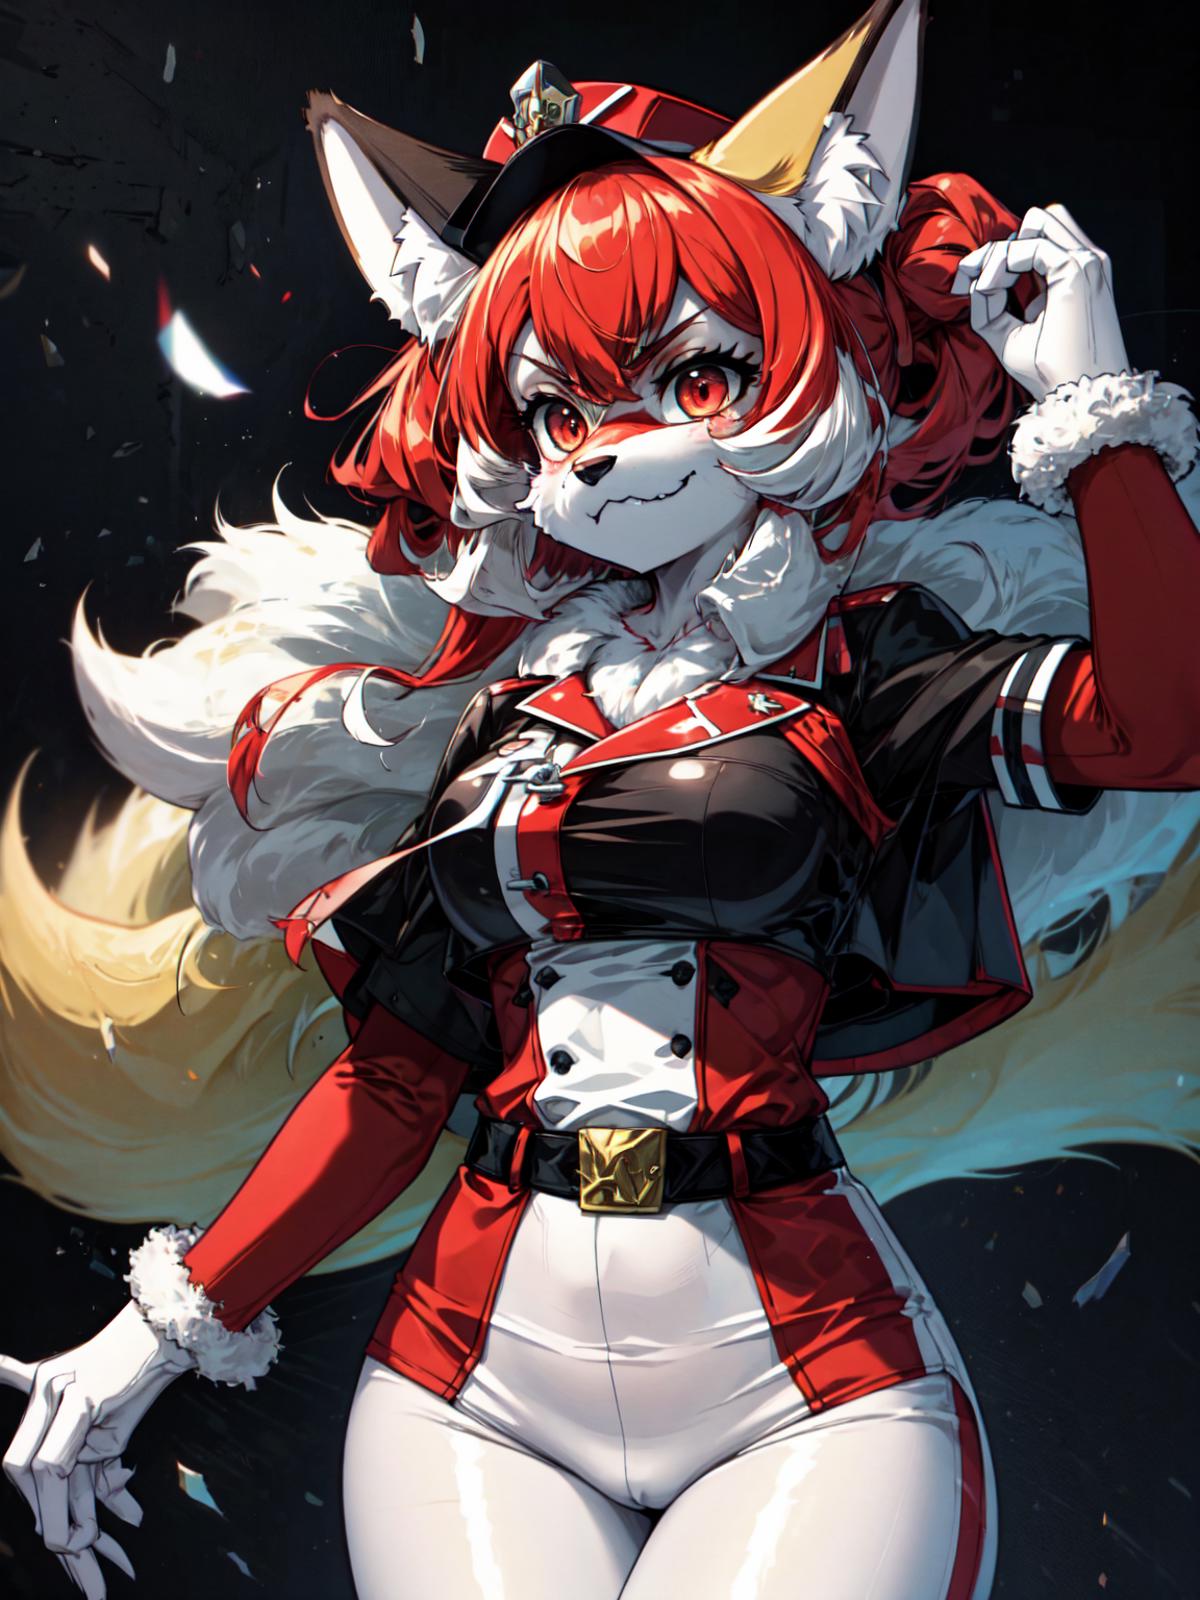 Furry Fox Girl Style #2 - Transform Characters into Fox Girls! image by neilarmstron12